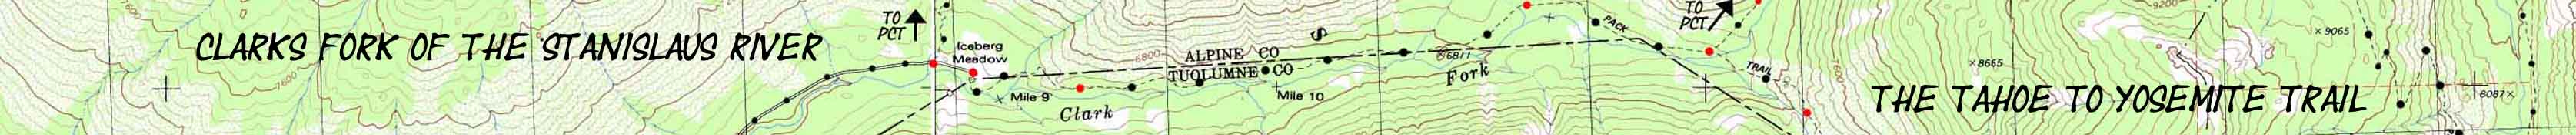 Banner: Map with Title, Tahoe to Whitney Maps, The Tahoe to Yosemite Trail